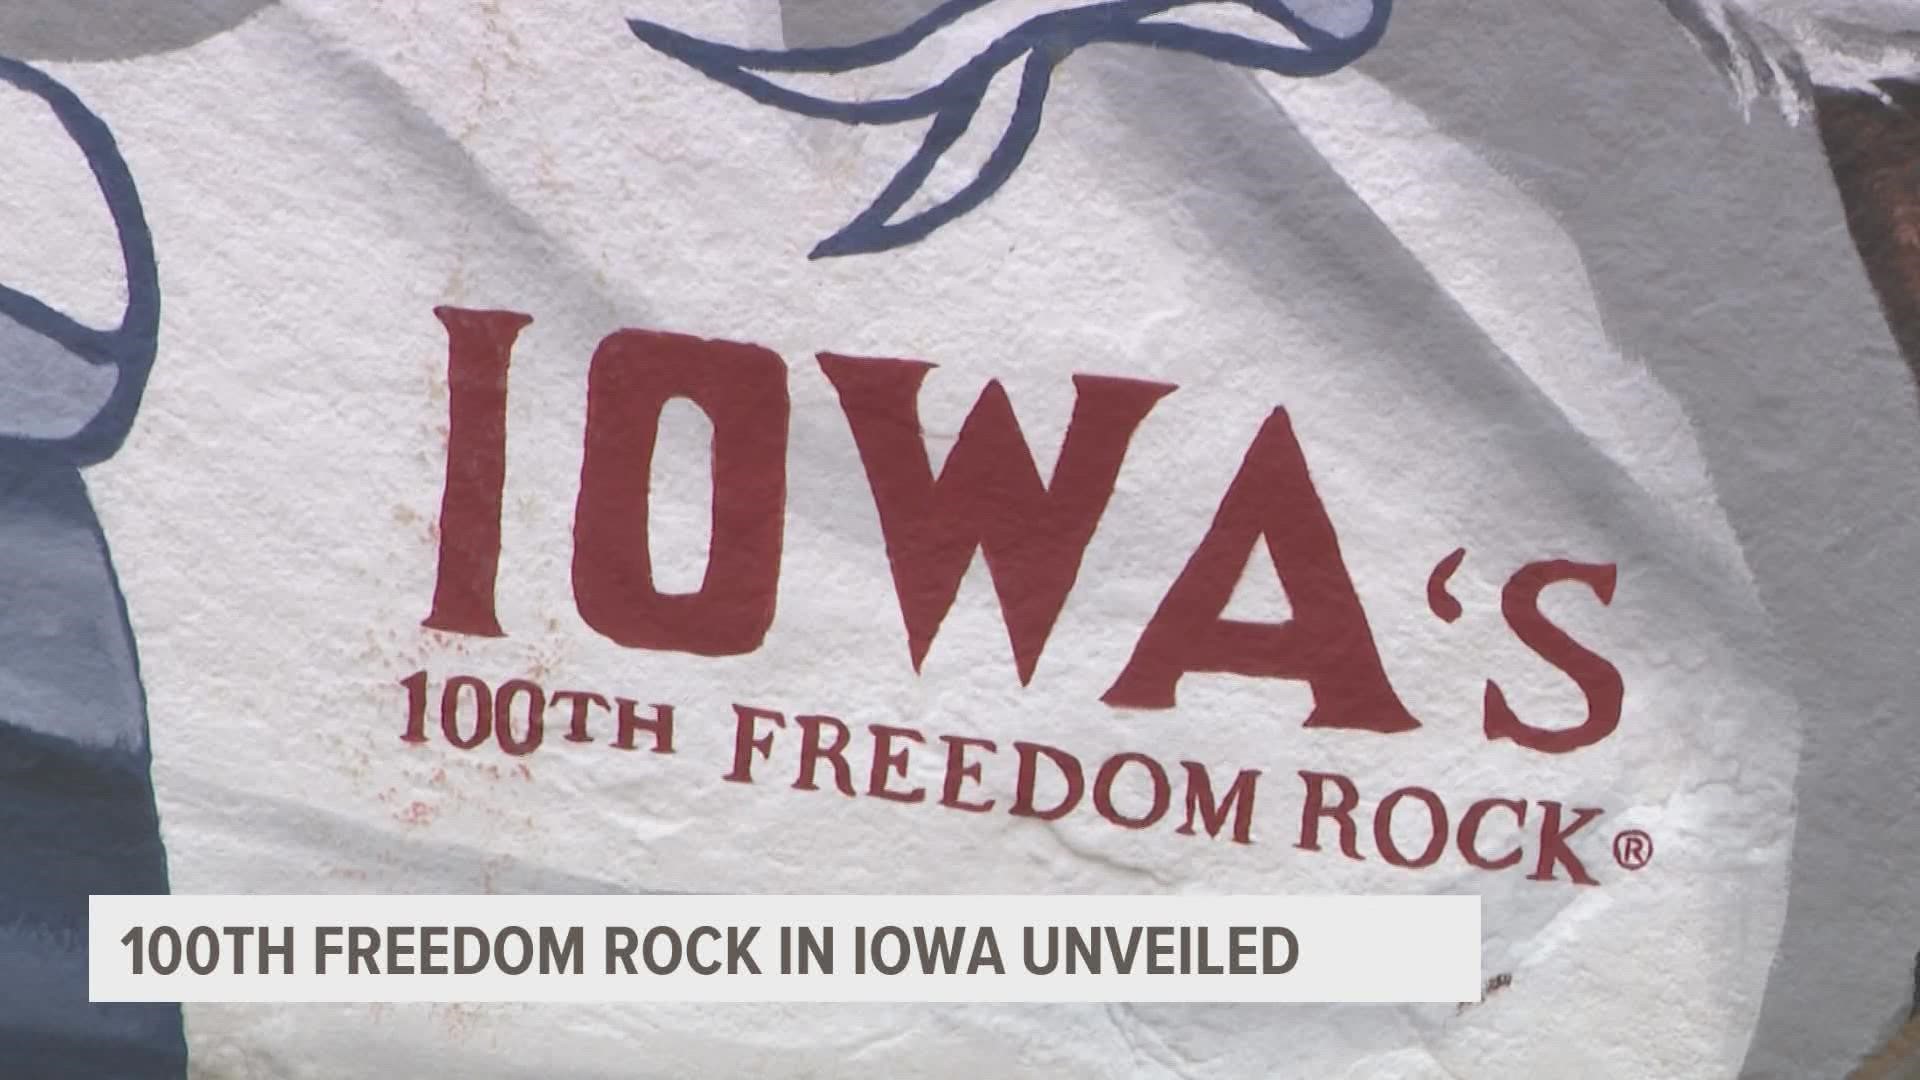 Iowa's 100th Freedom Rock was dedicated today. The artist of these murals, State Rep. Ray Sorenson, has painted patriotic scenes on stones in all 99 counties.